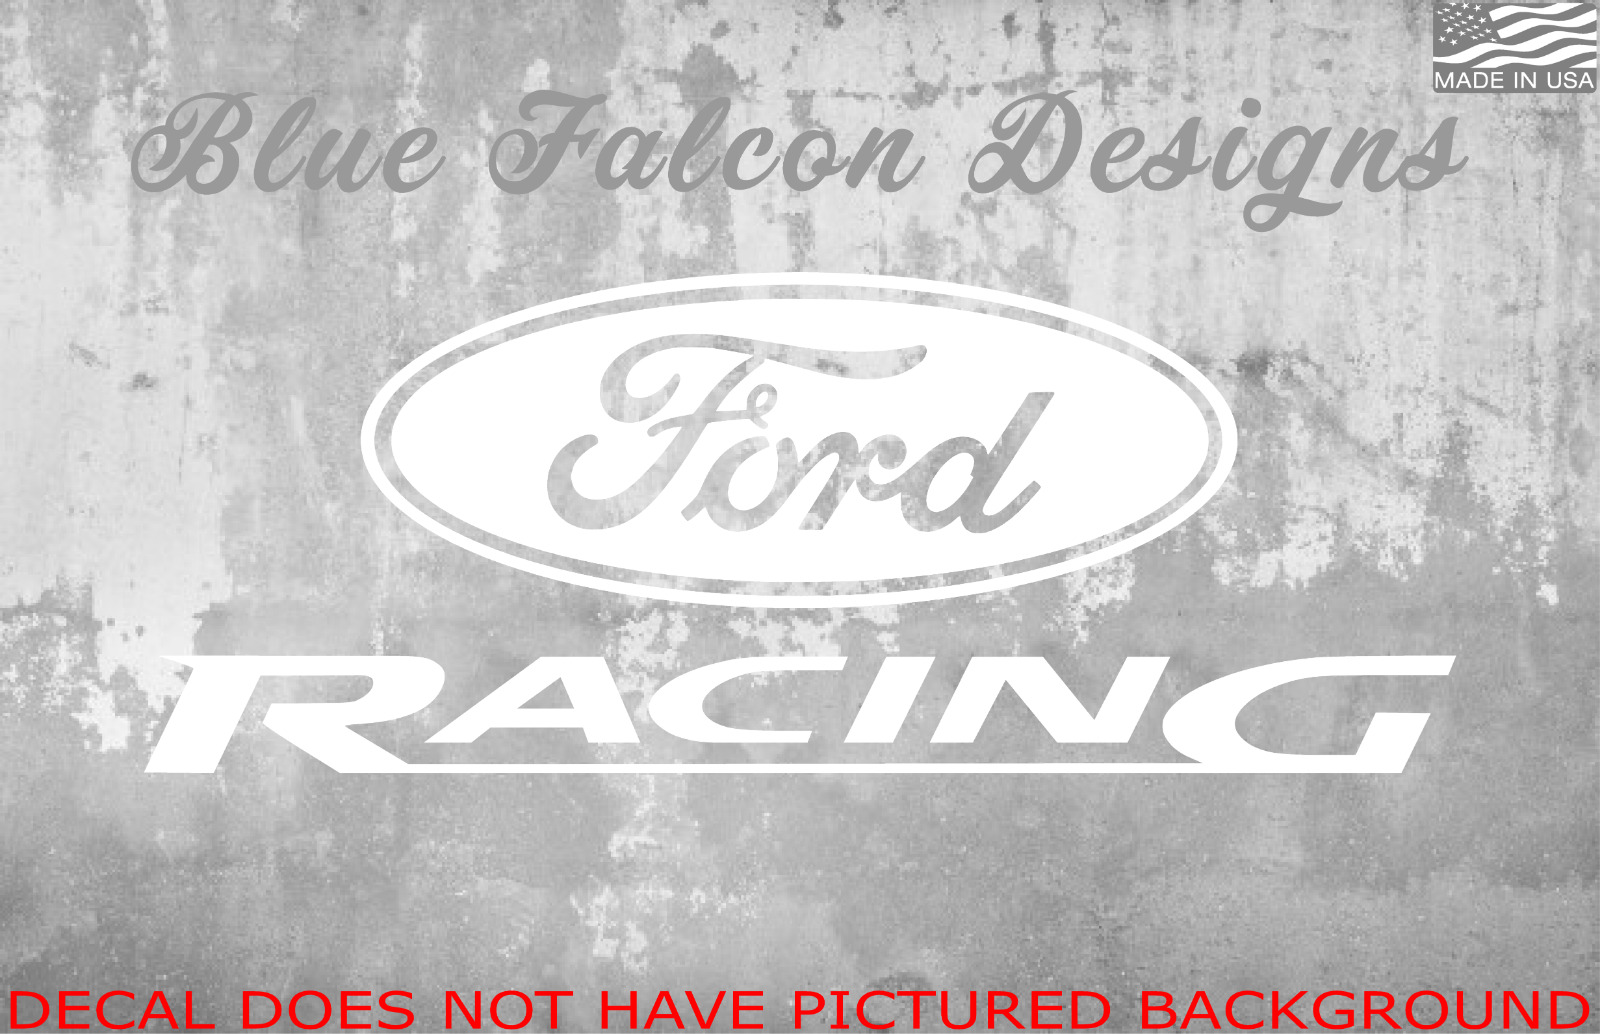 Ford Racing Decal Sticker Vinyl